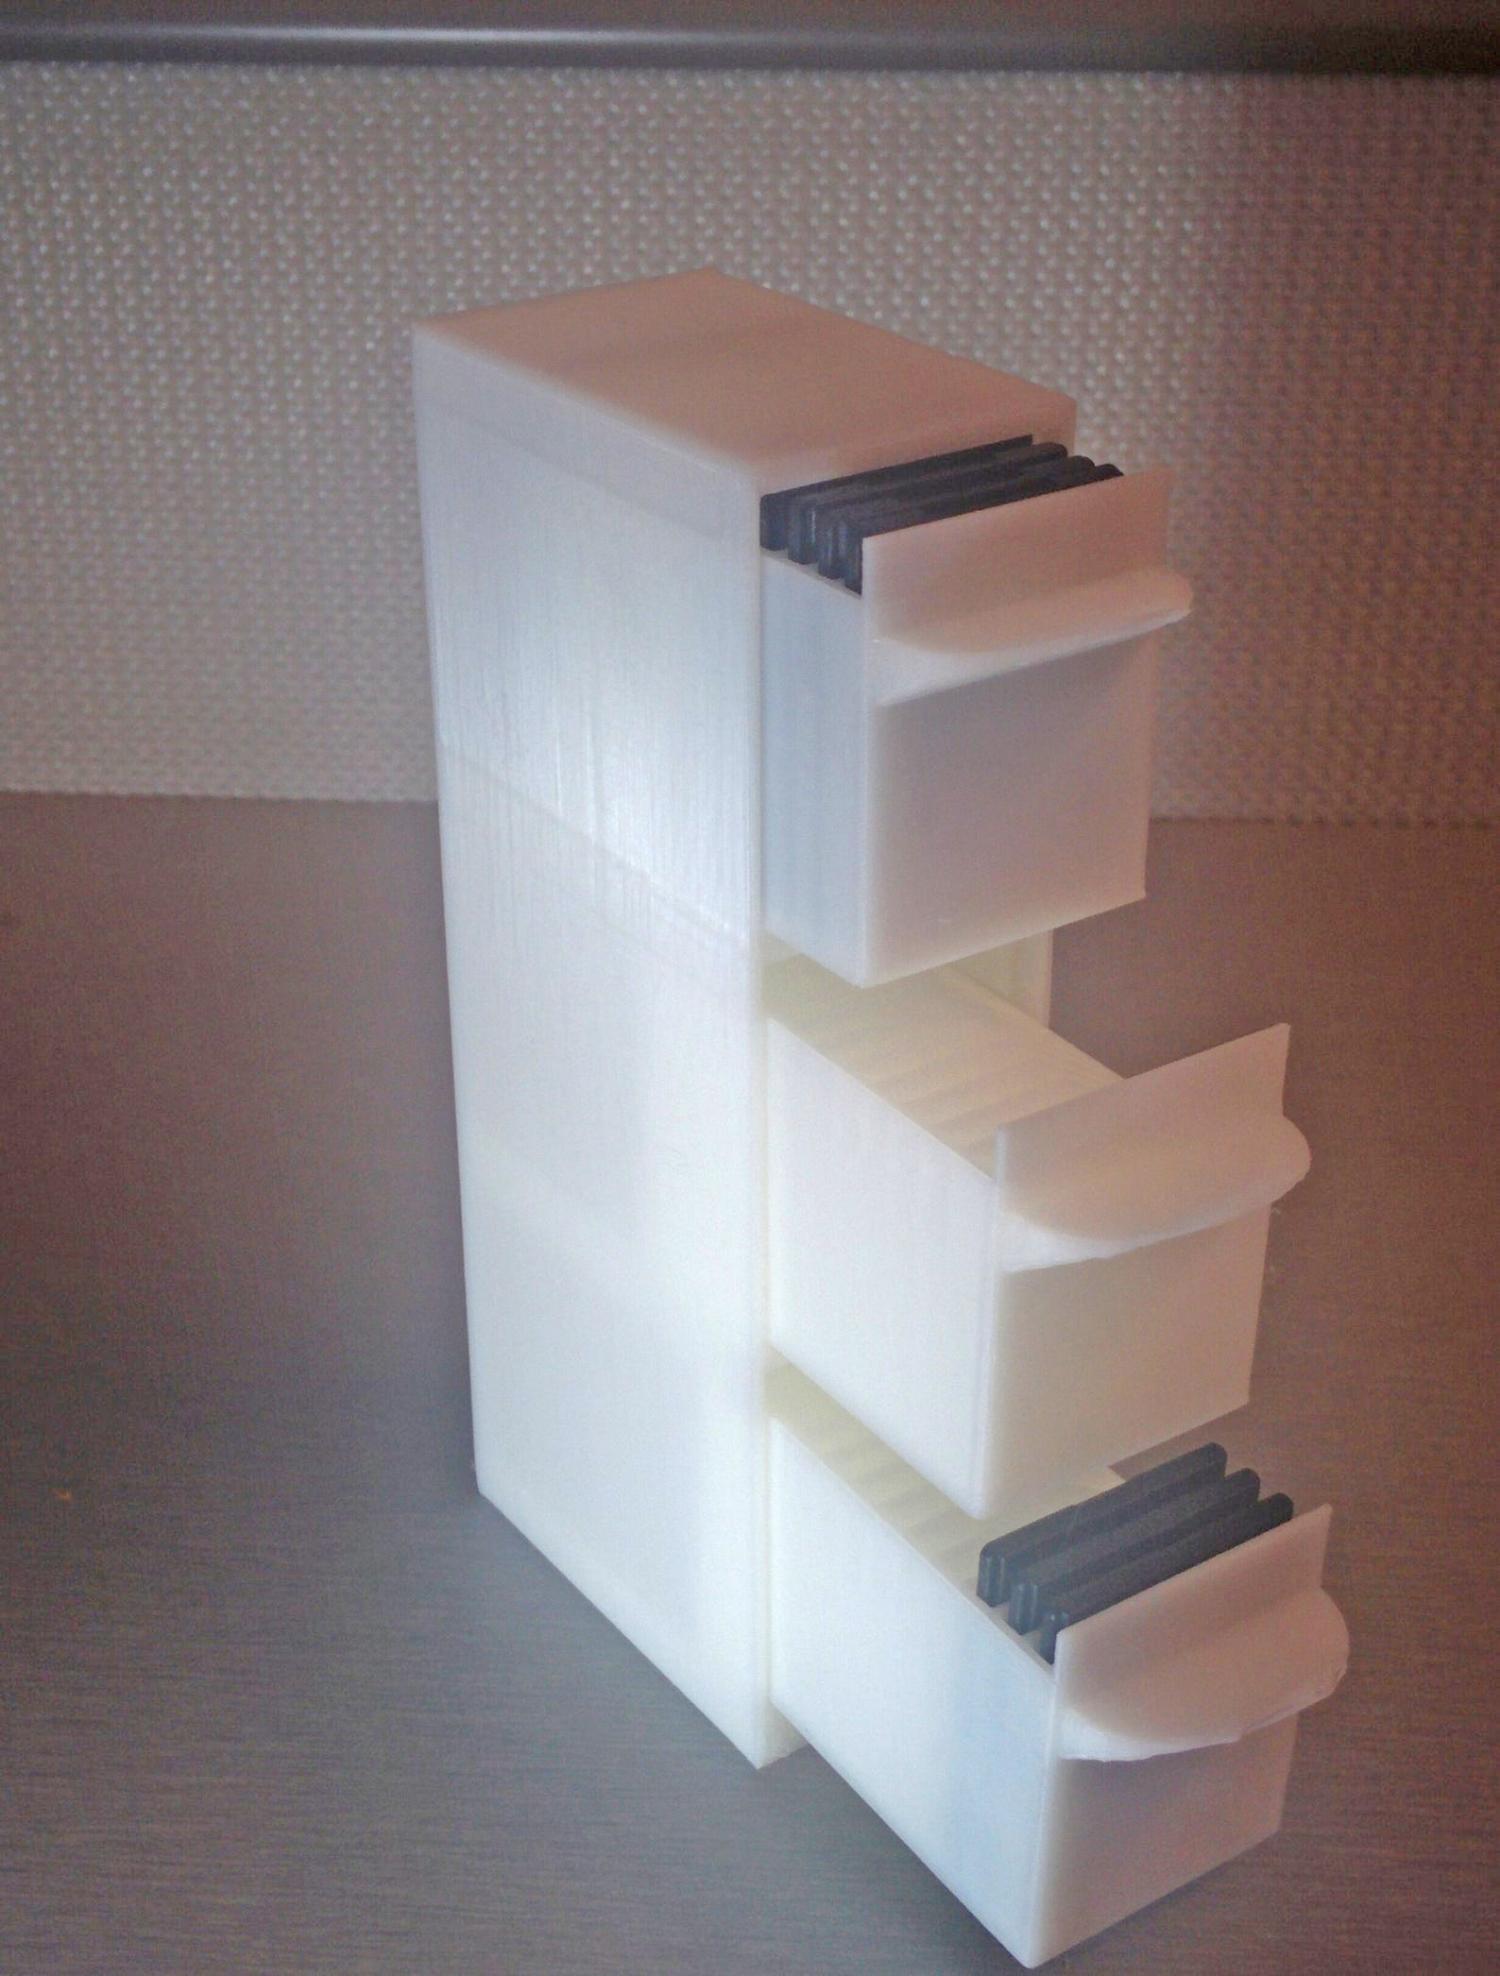 Tiny Filing Cabinet For SD Cards - 3D Printed Mini Filing Cabinet that holds micro SD cards